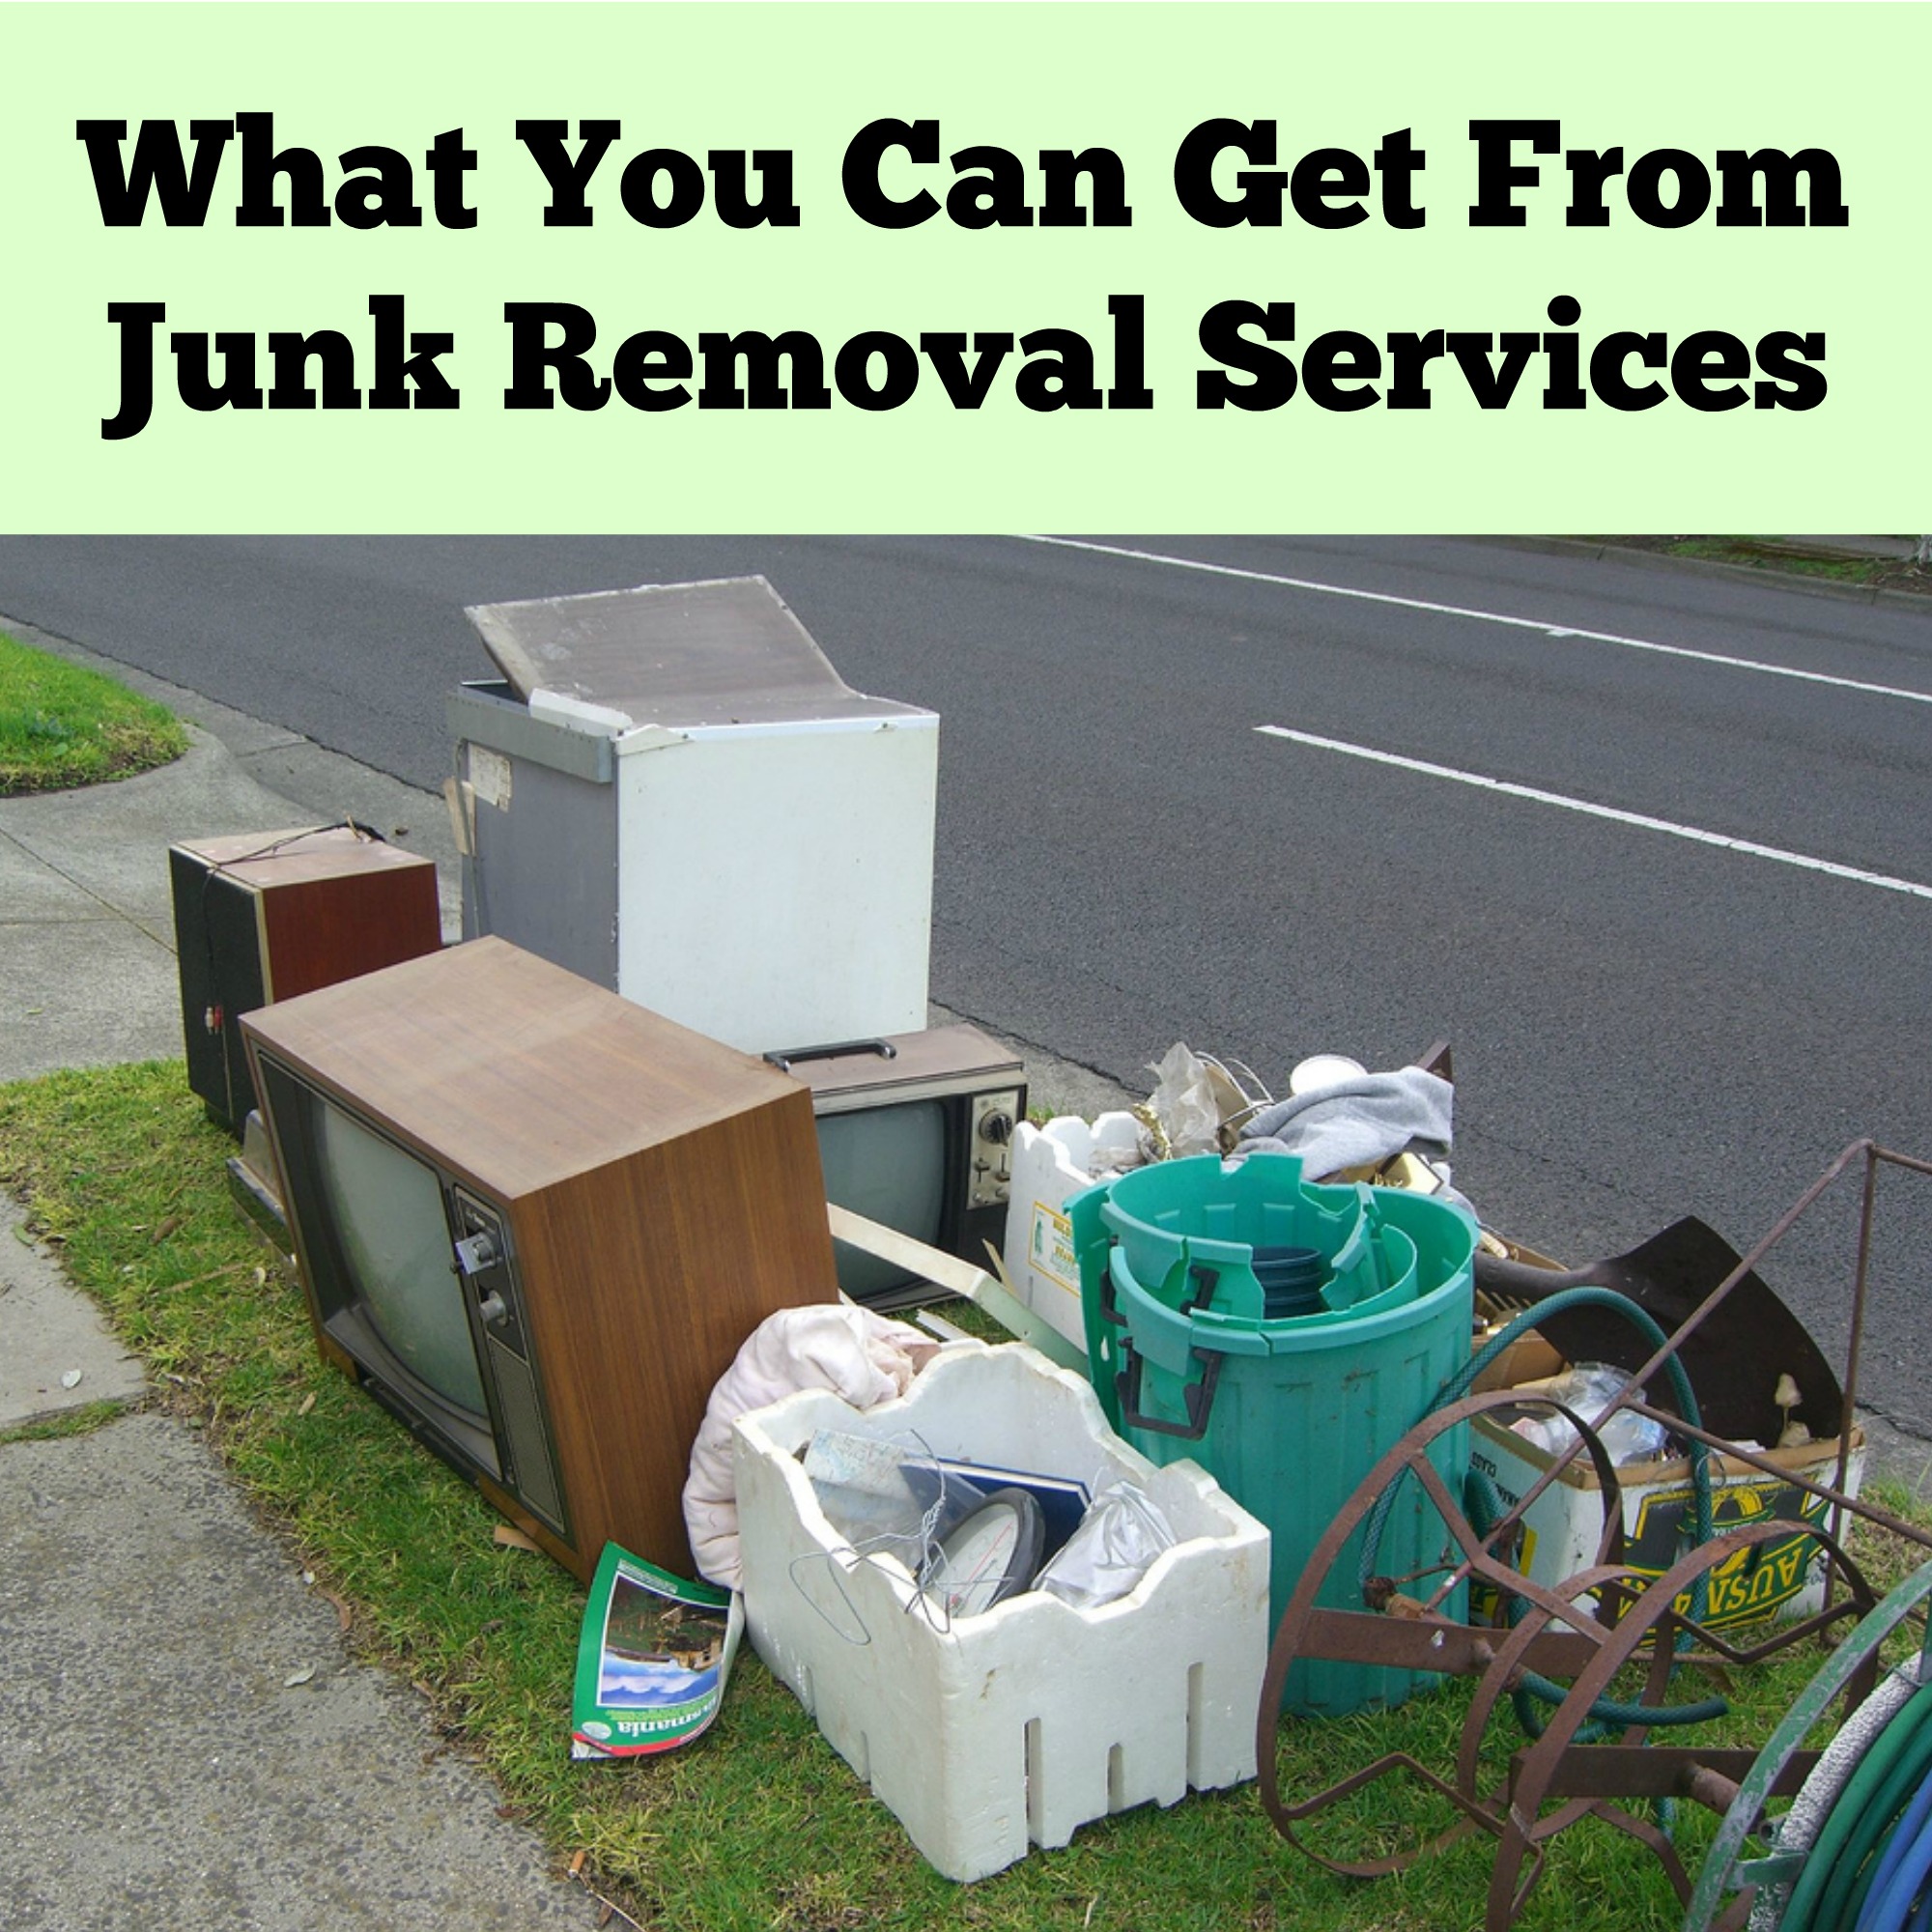 What Can You Get from Junk Removal Services